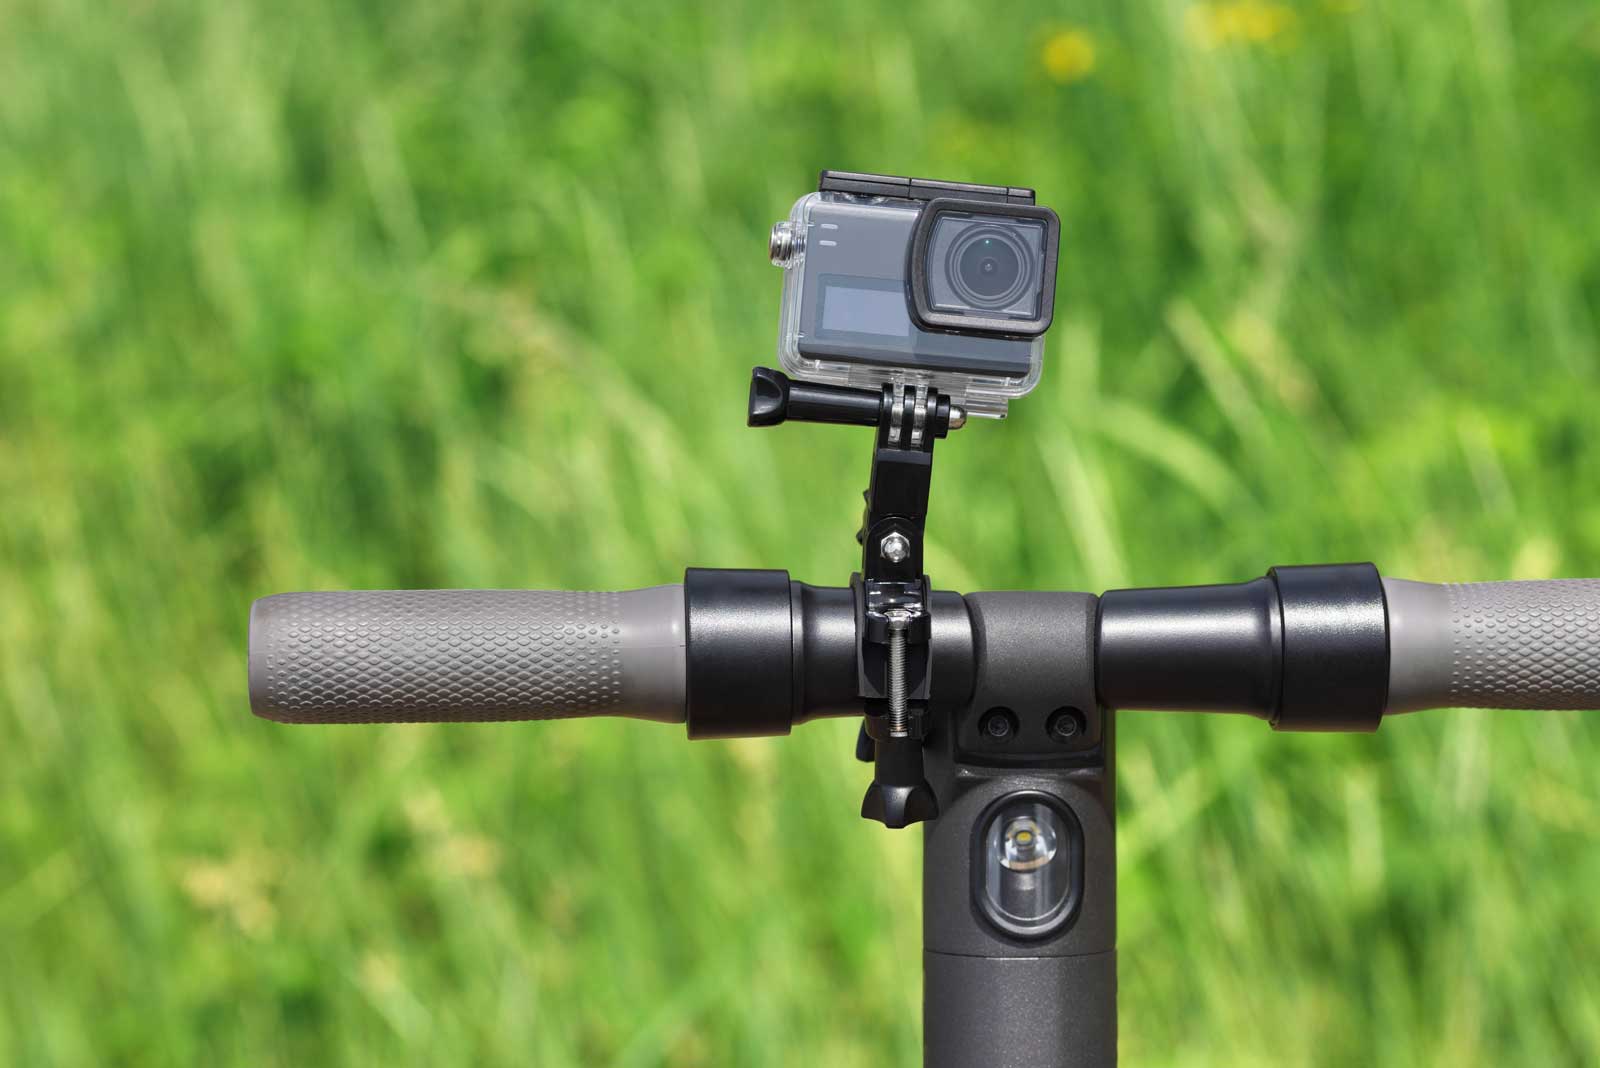 A GoPro rigged to a bike as an example of what is time lapse photography using action cams.